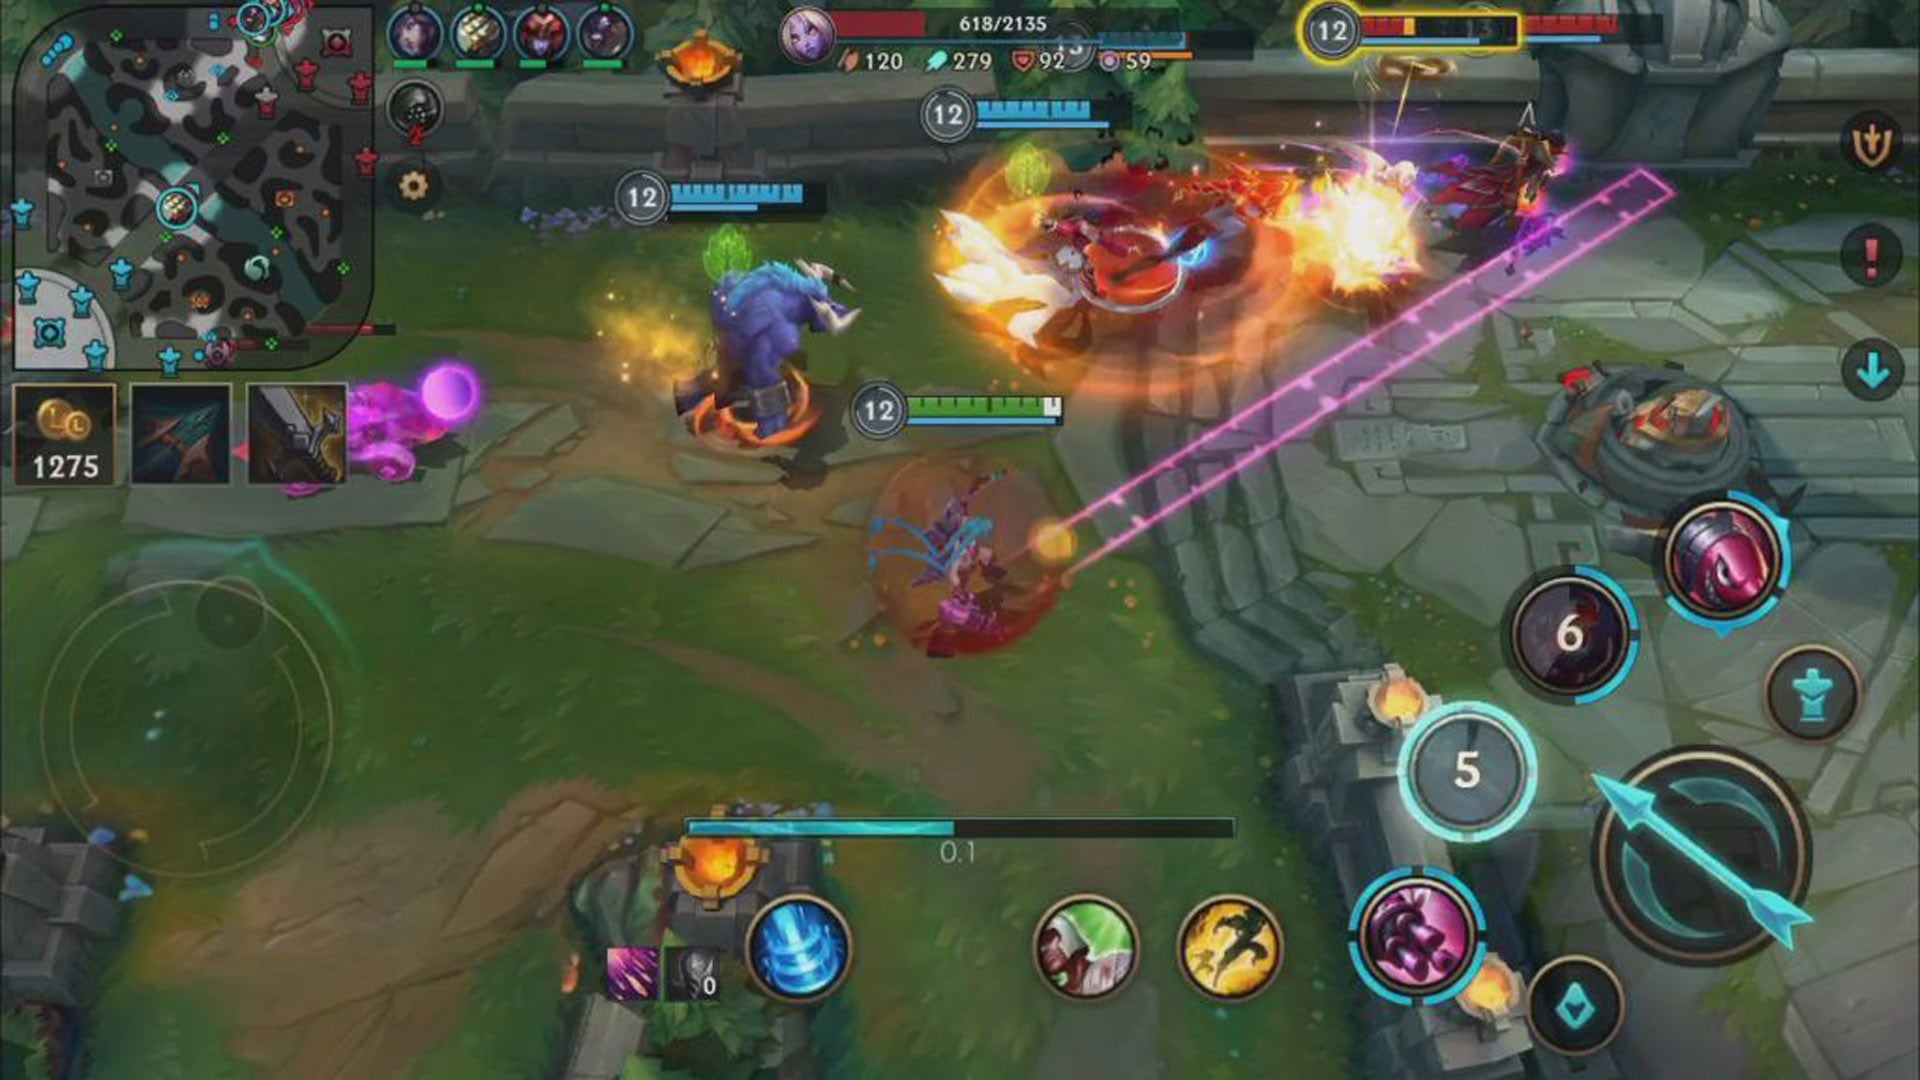 League of Legends Mobile gameplay showing a high-intensity battle on Summoner's Rift